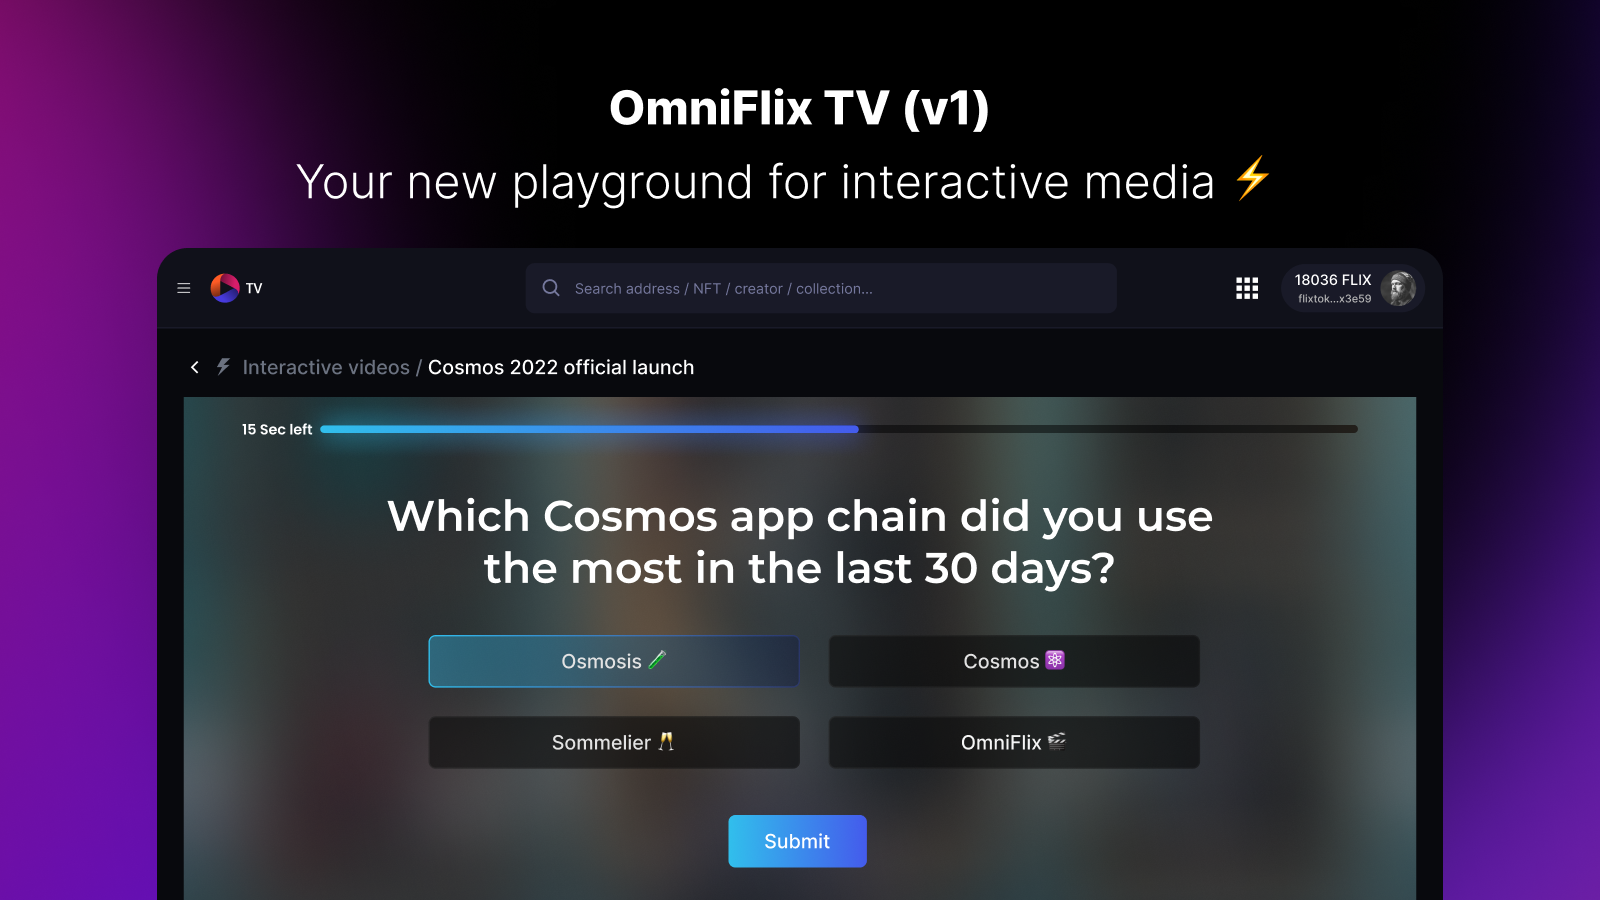 A preview of a text-based interaction on an interactive video on OmniFlix TV